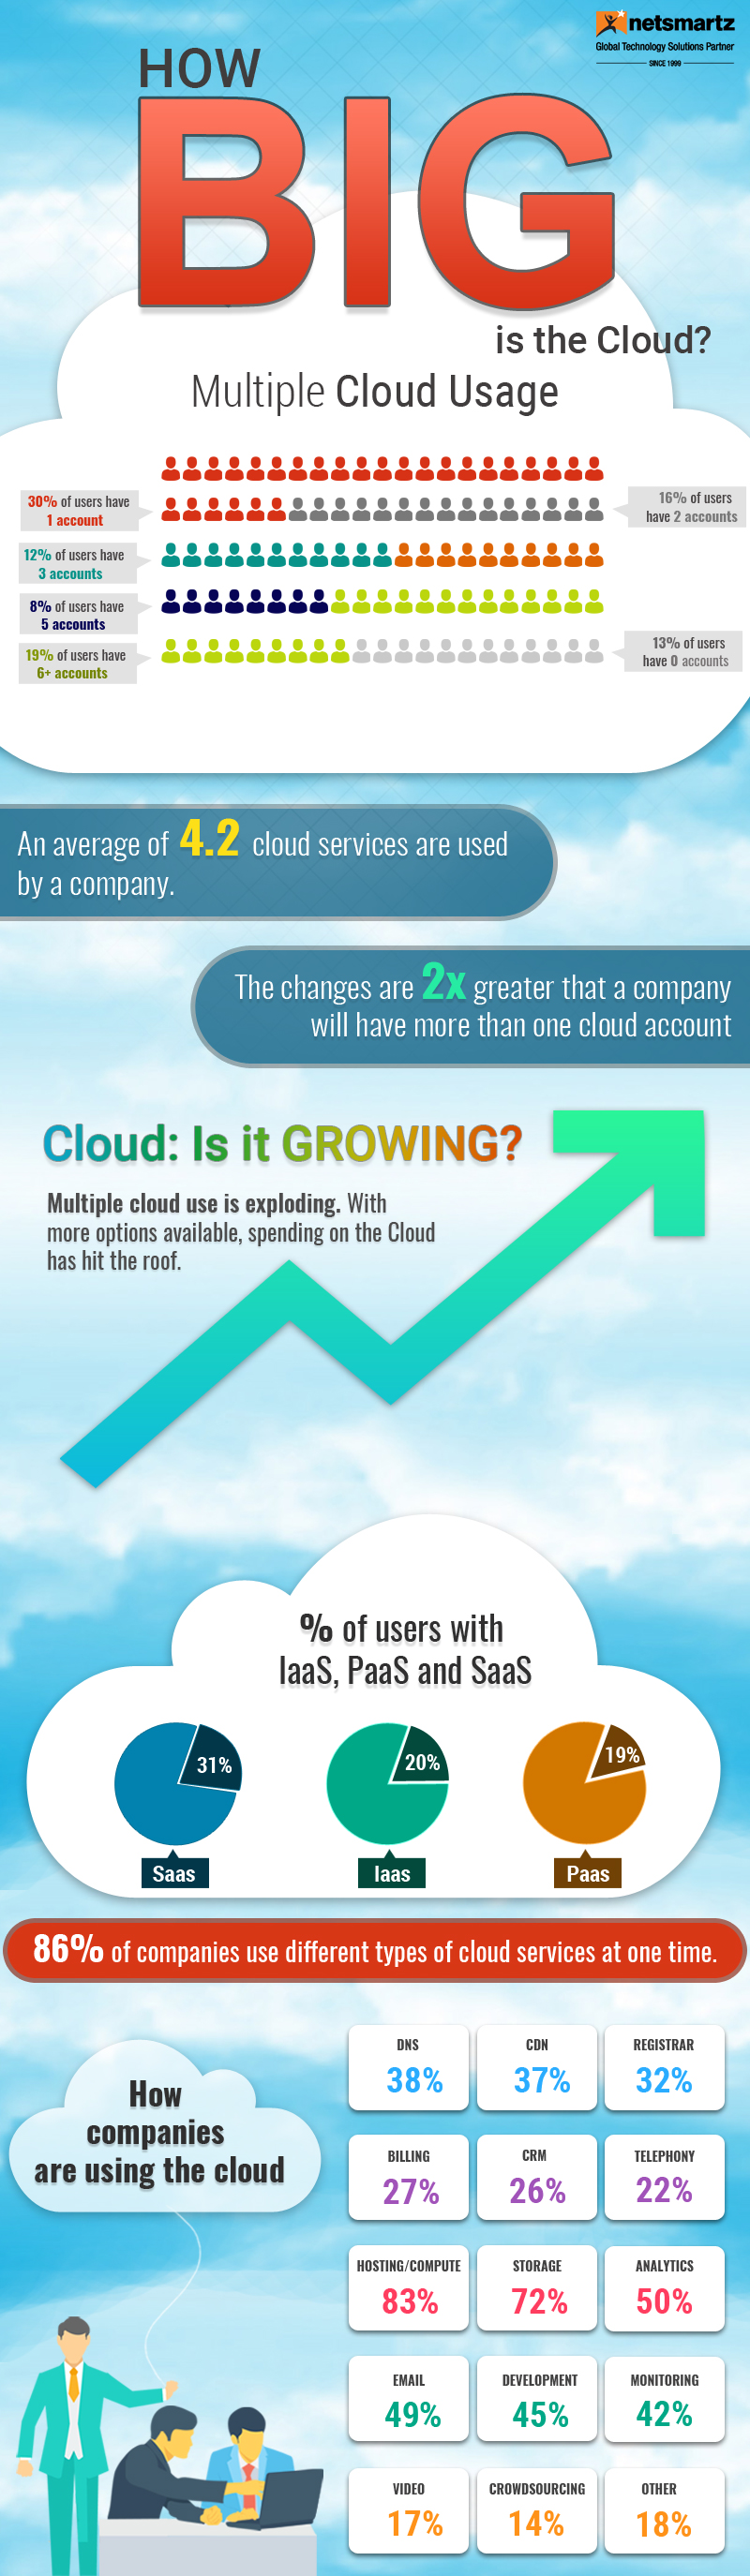 How big is the cloud infographic